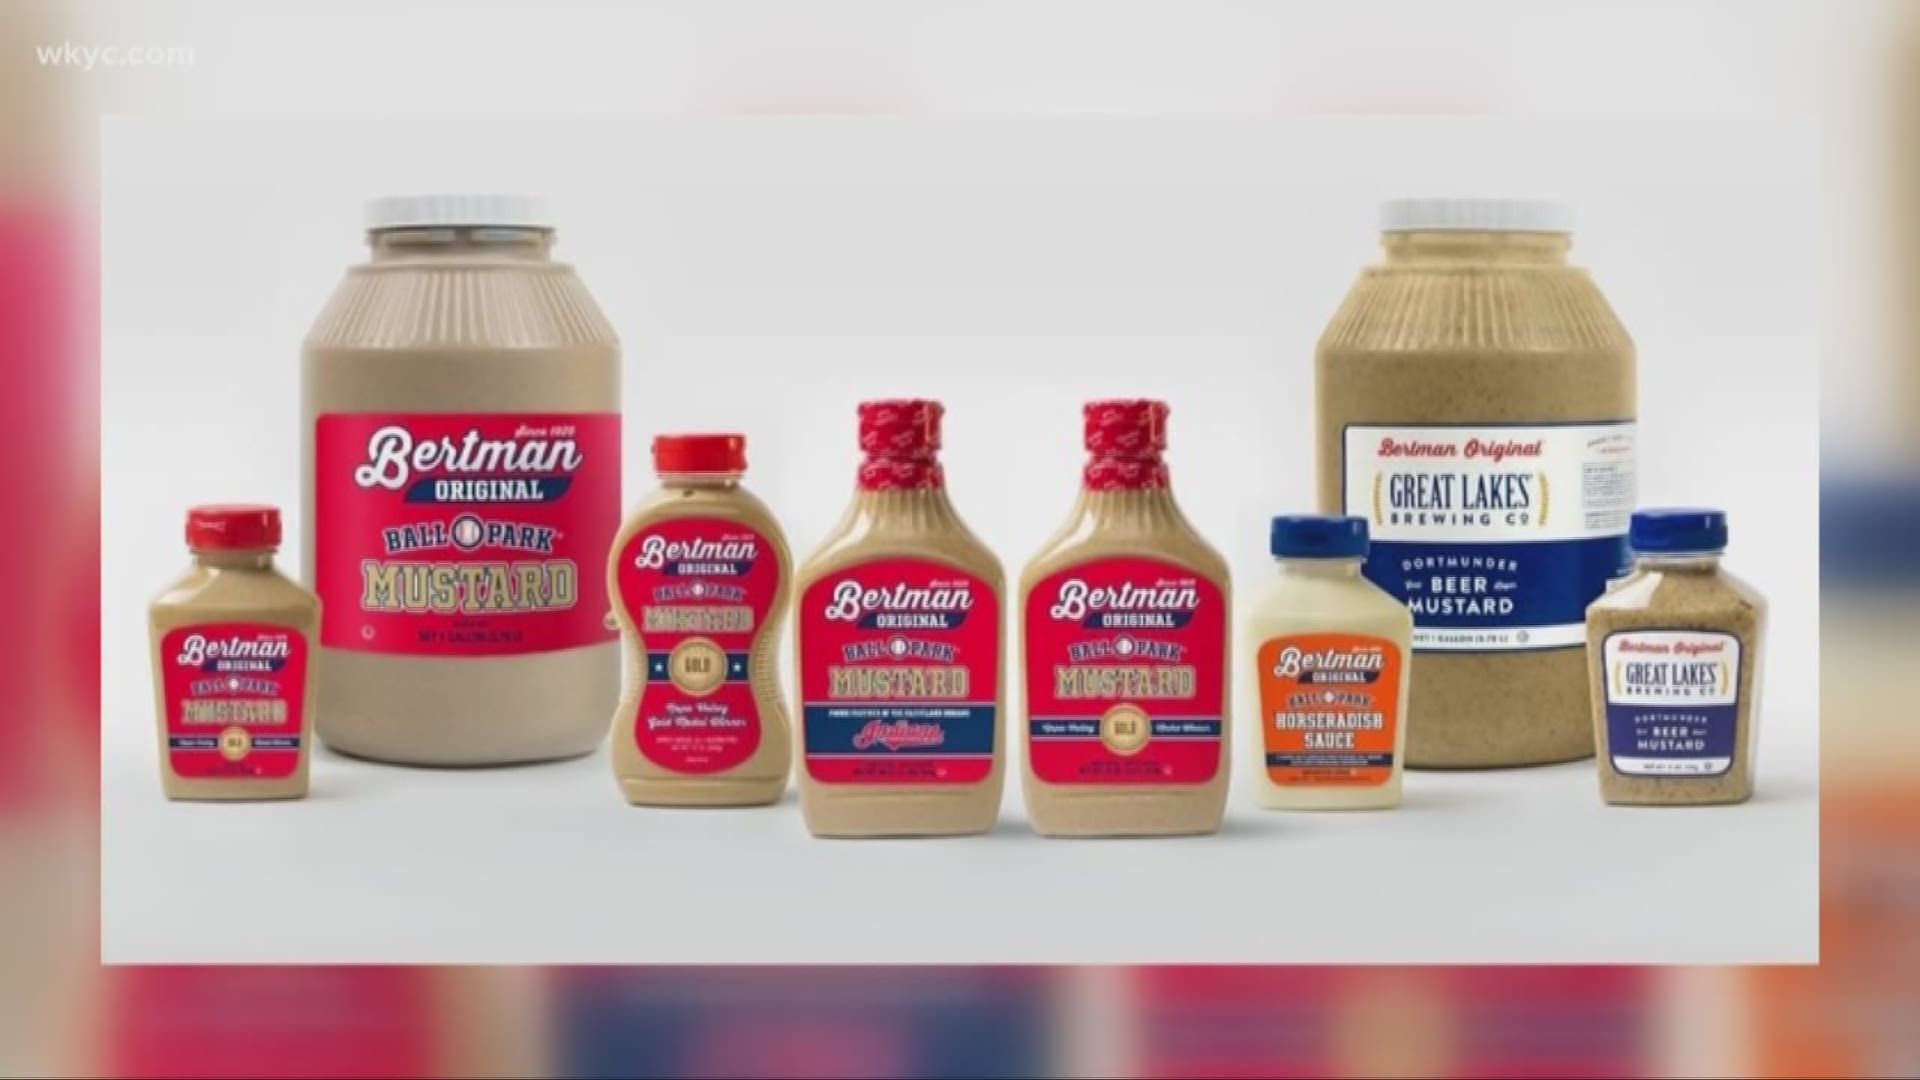 Feb. 13, 2019: Bertman, maker of Cleveland's iconic ballpark mustard, has ditched the Cleveland Indians' old Chief Wahoo logo from its labels. The brand revealed new labels Wednesday, but noted that the mustard recipe remains the same.